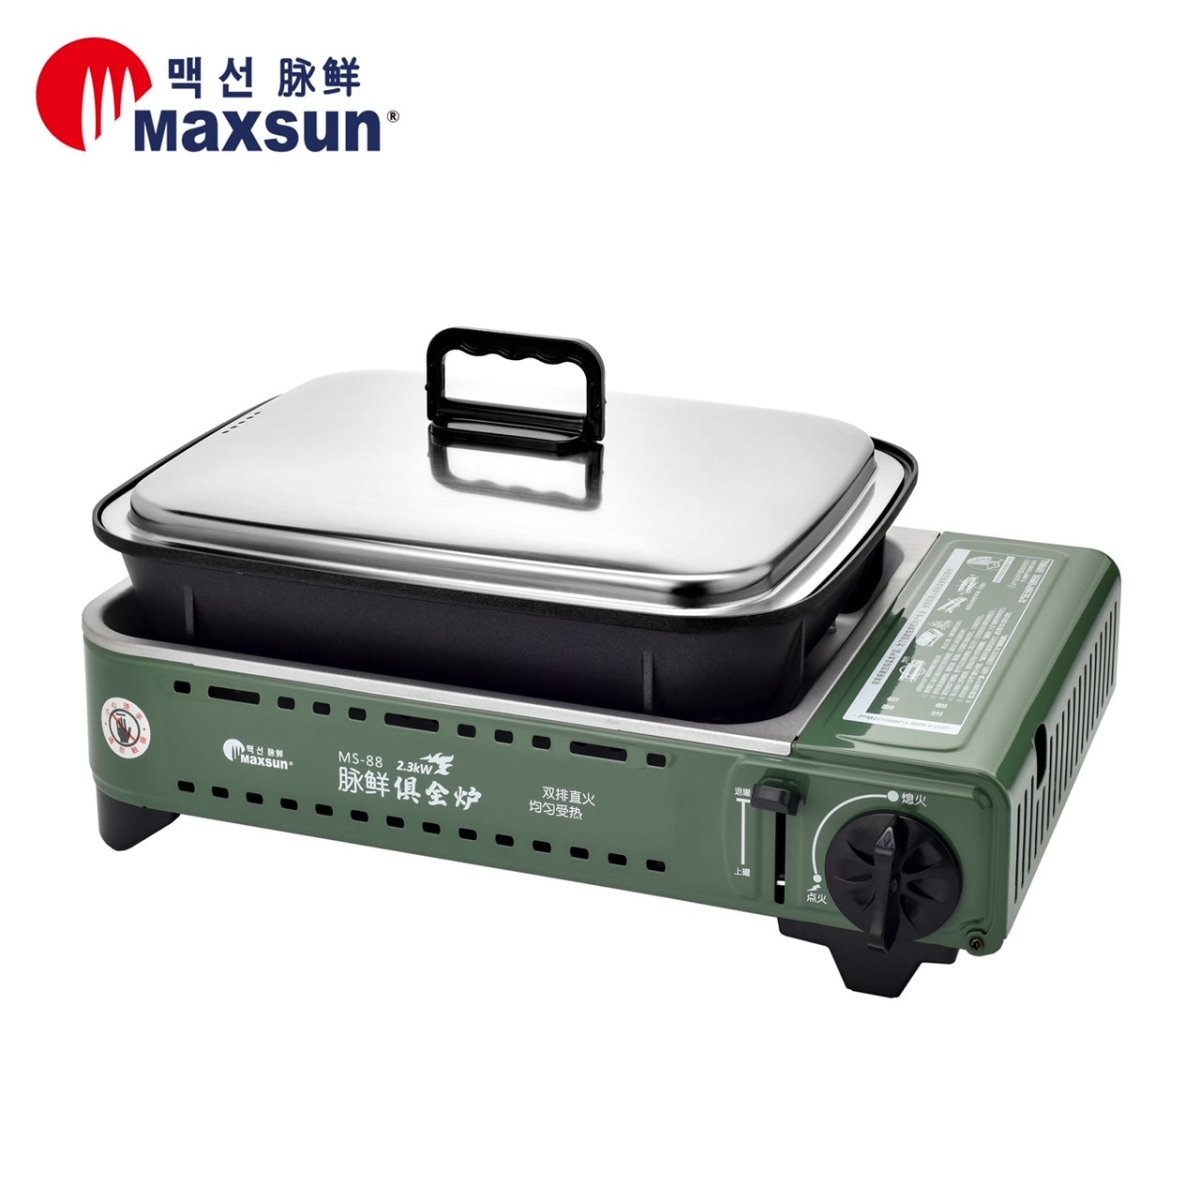 Portable Butane Bbq Gas Stove With Grill Plate - Black (No Lid)